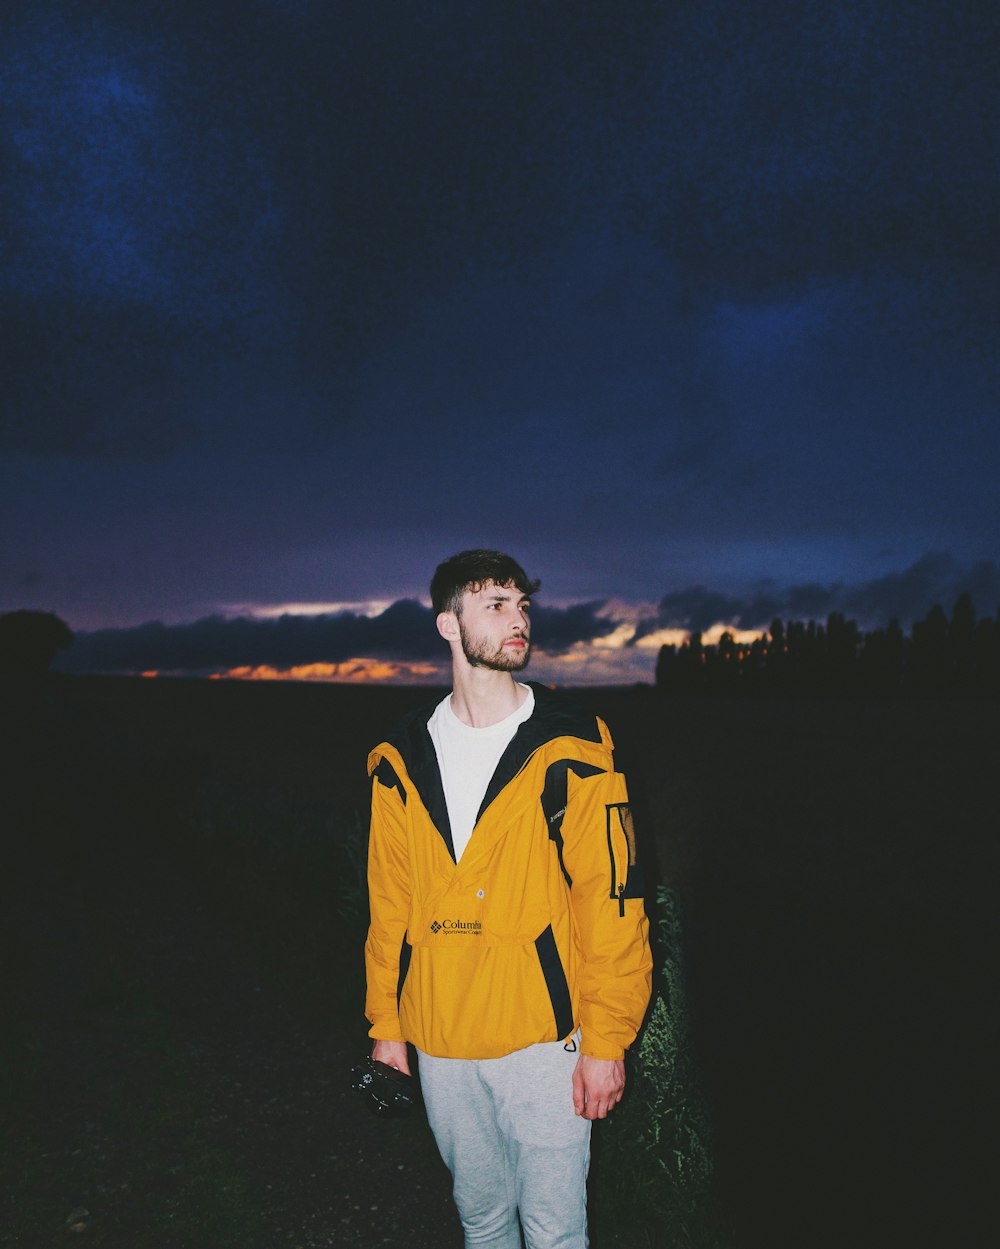 man in yellow jacket standing near body of water during night time